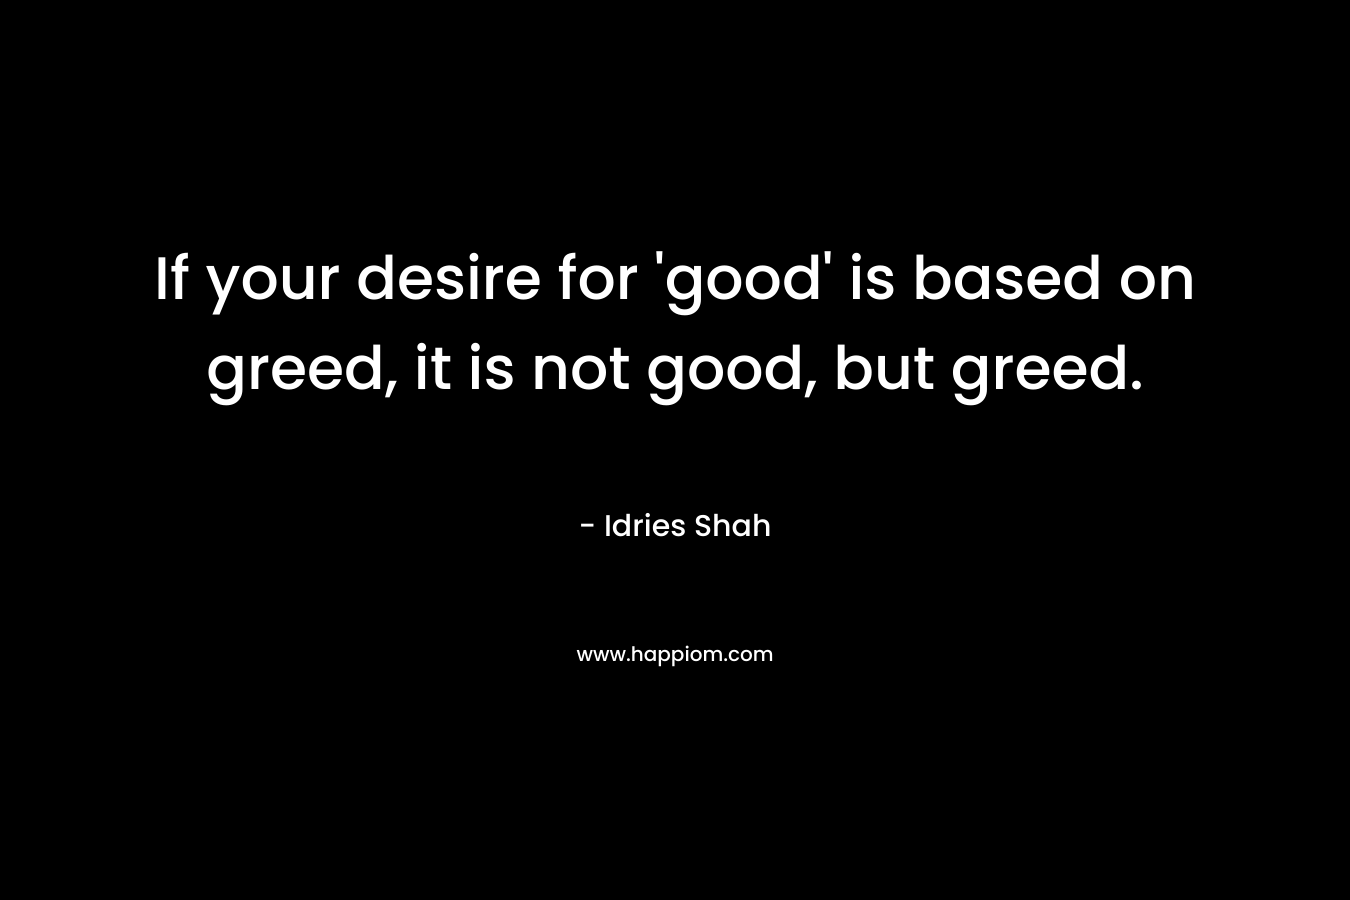 If your desire for 'good' is based on greed, it is not good, but greed.